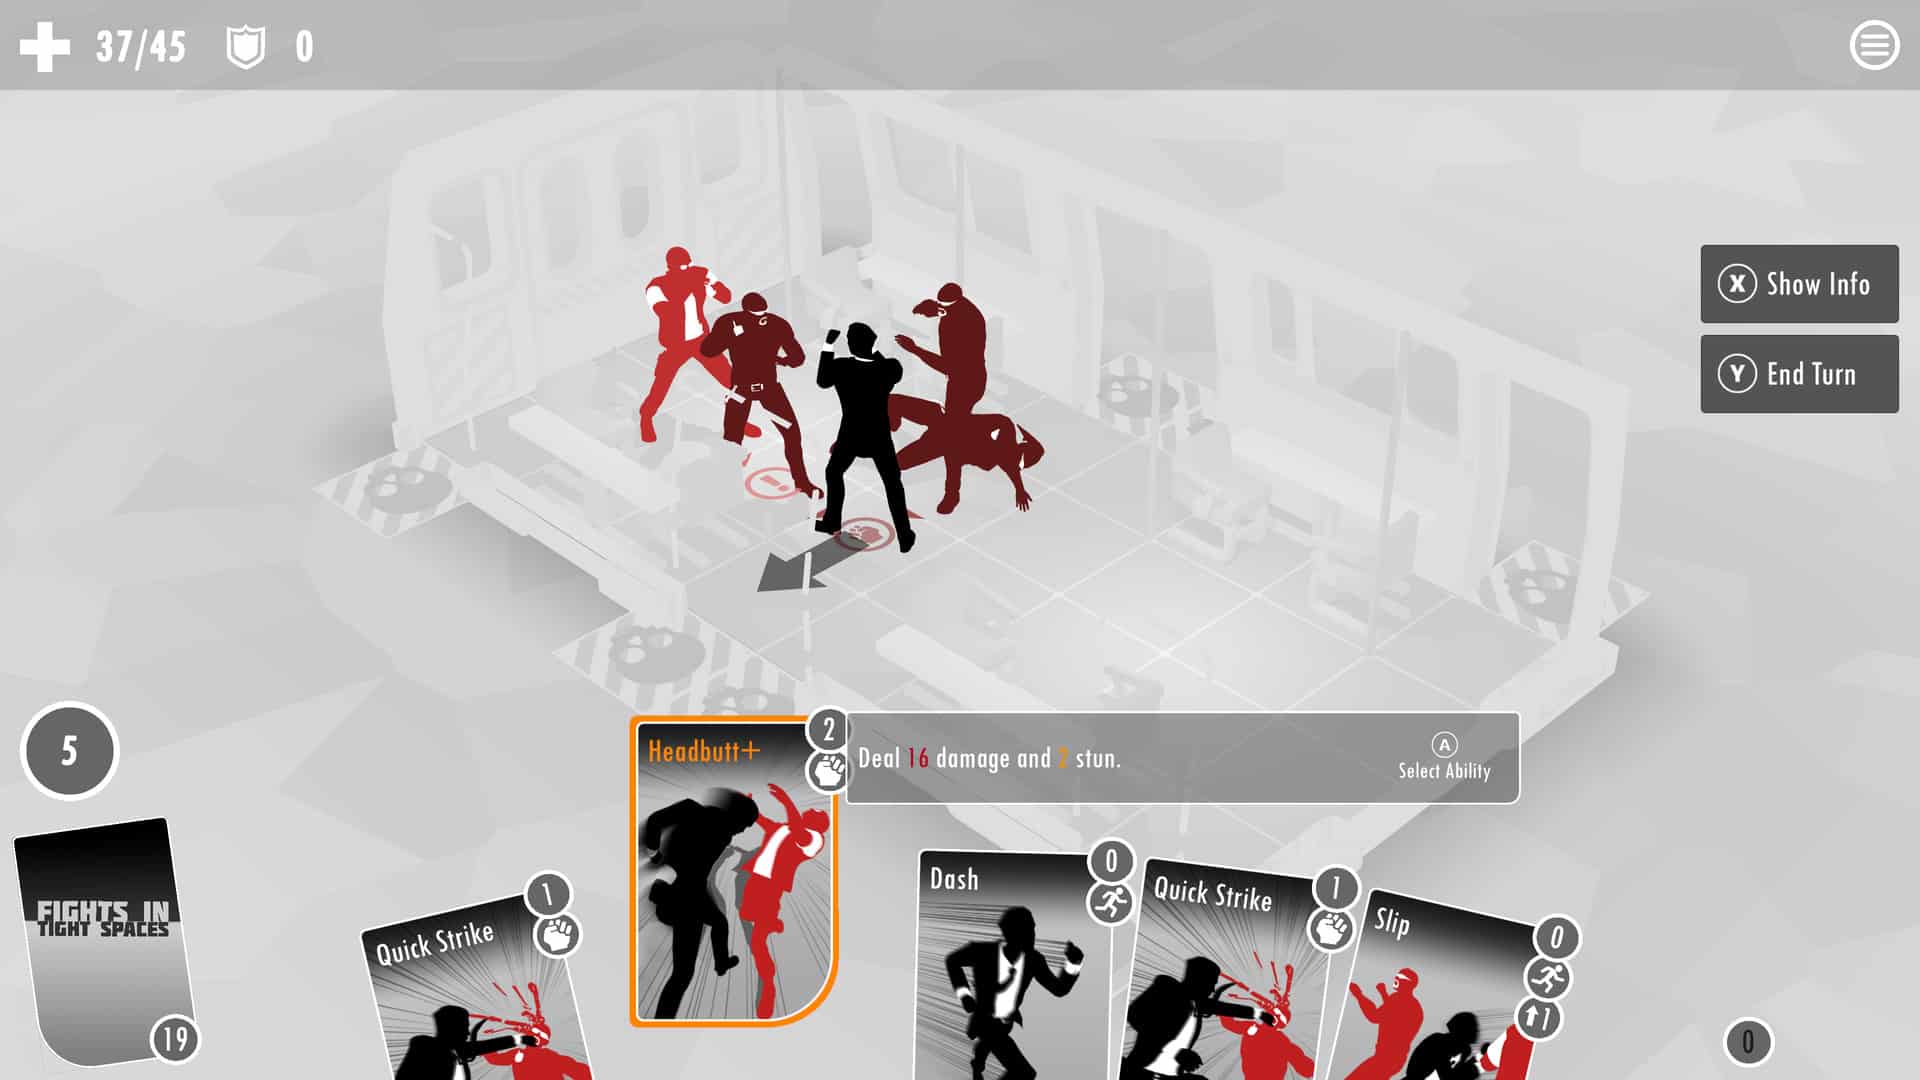 Fights In Tight Spaces screenshot showing combat on board a train